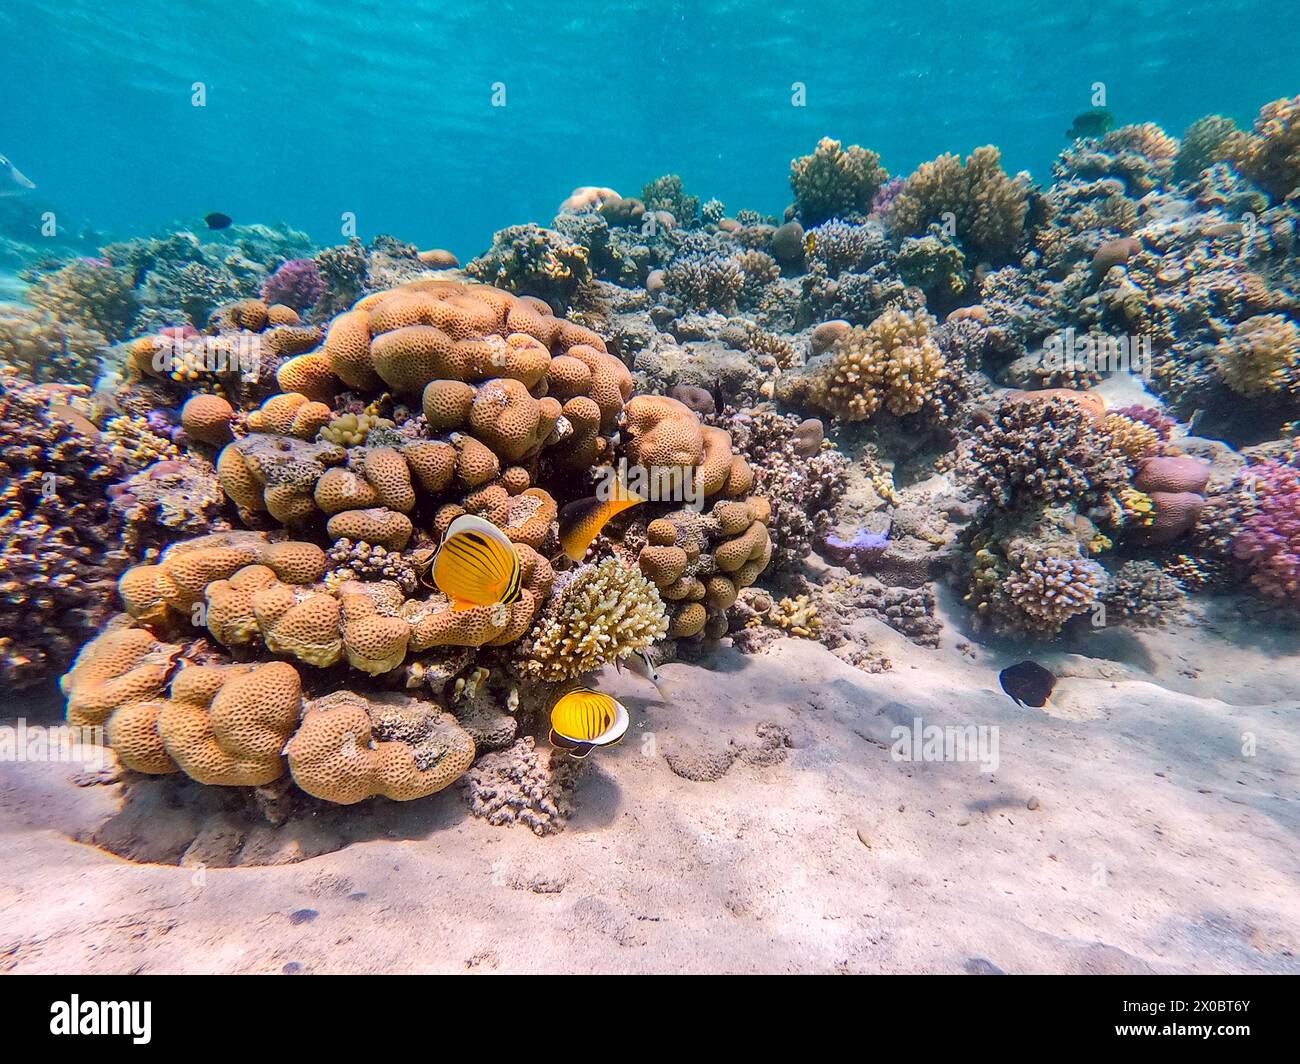 Tropical Blacktail butterflyfish or exquisite butterflyfish  known as Chaetodon austriacus underwater at the coral reef. Underwater life of reef with Stock Photo